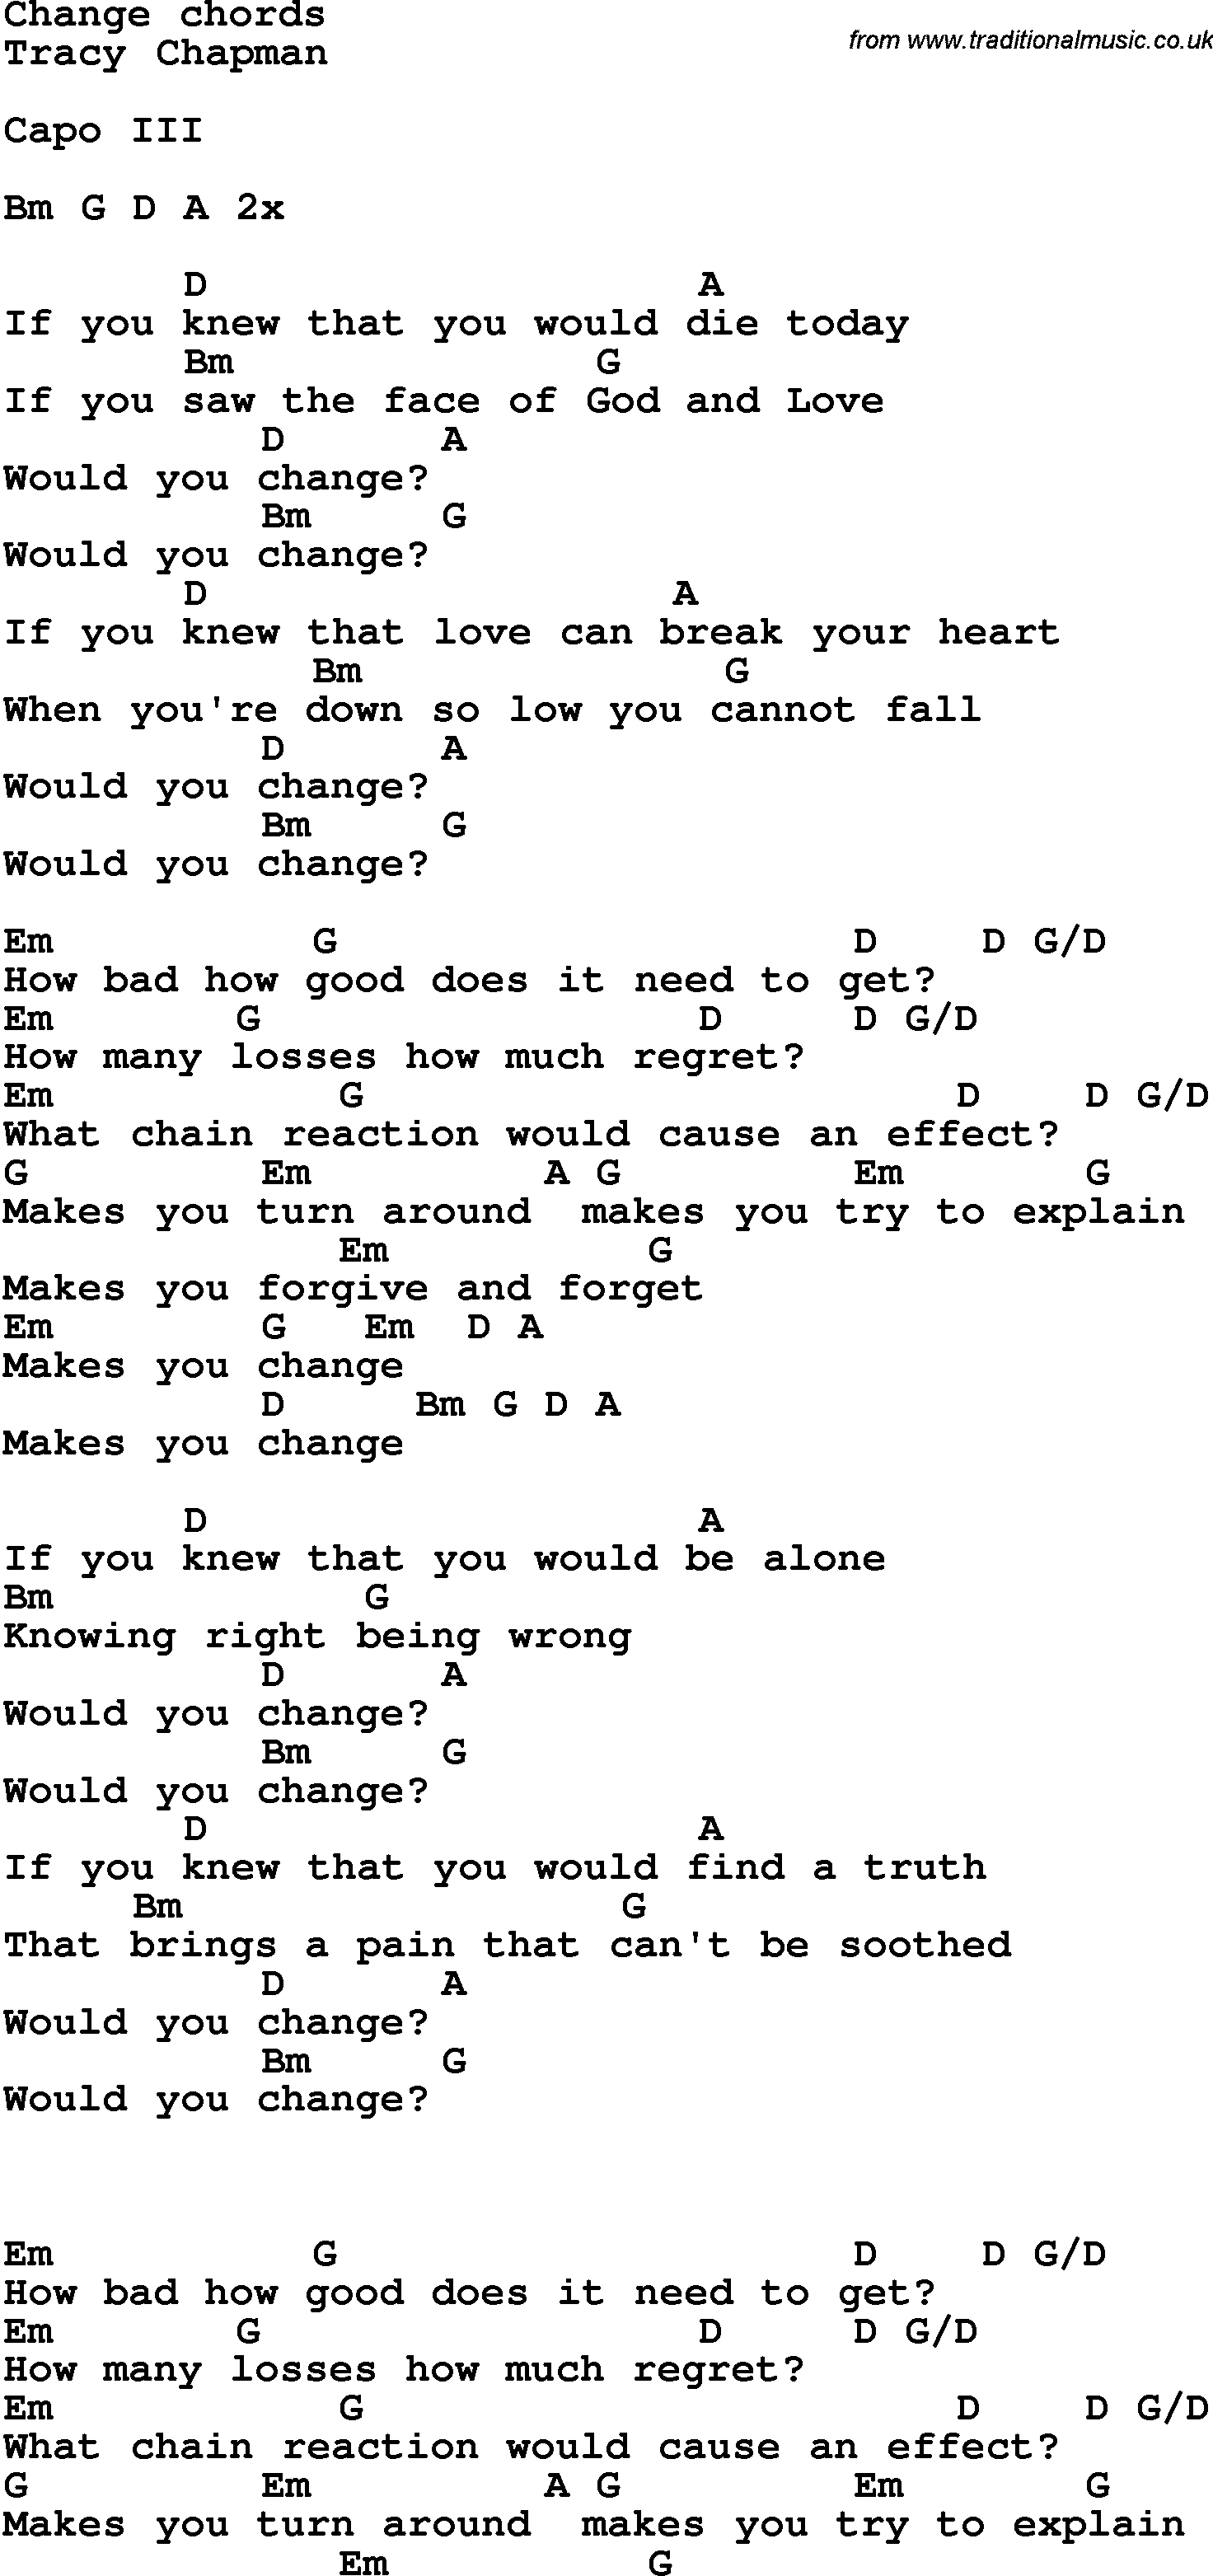 Song Lyrics with guitar chords for Change